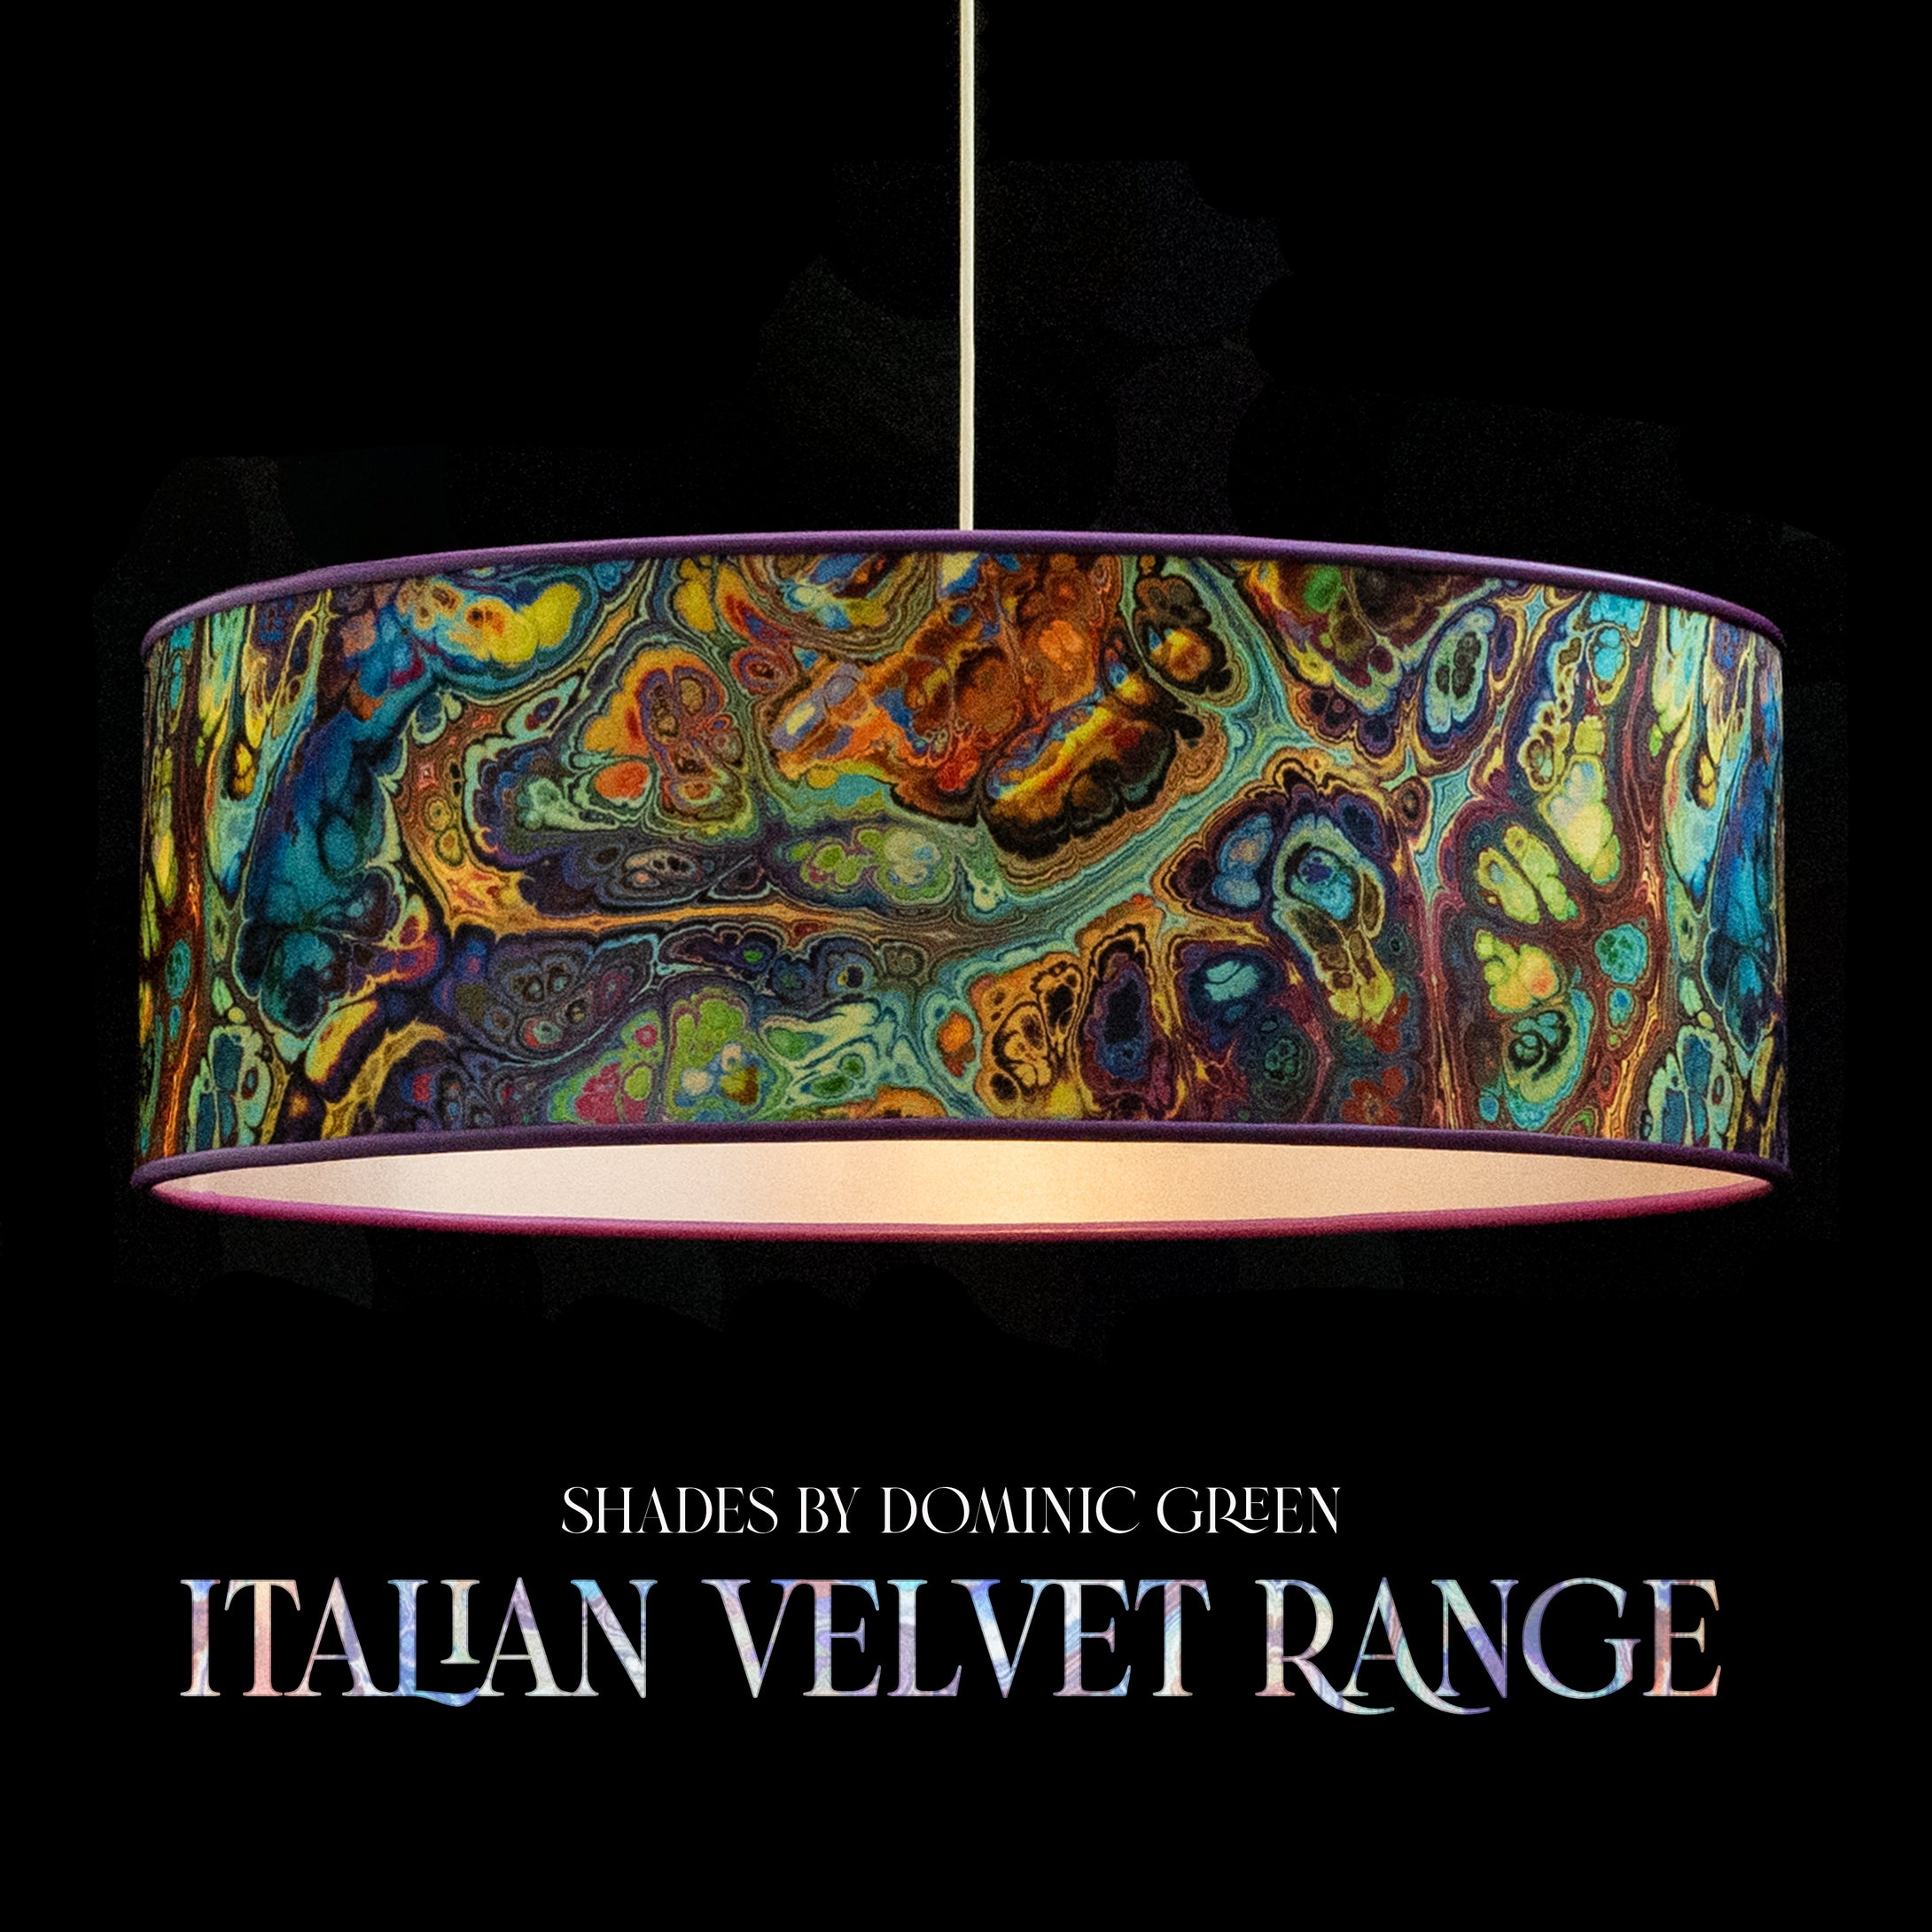 Luxurious Italian velvet lampshade in retro swirl pattern which glows beautifully with light on. These are custom bespoke made lampshades for life.